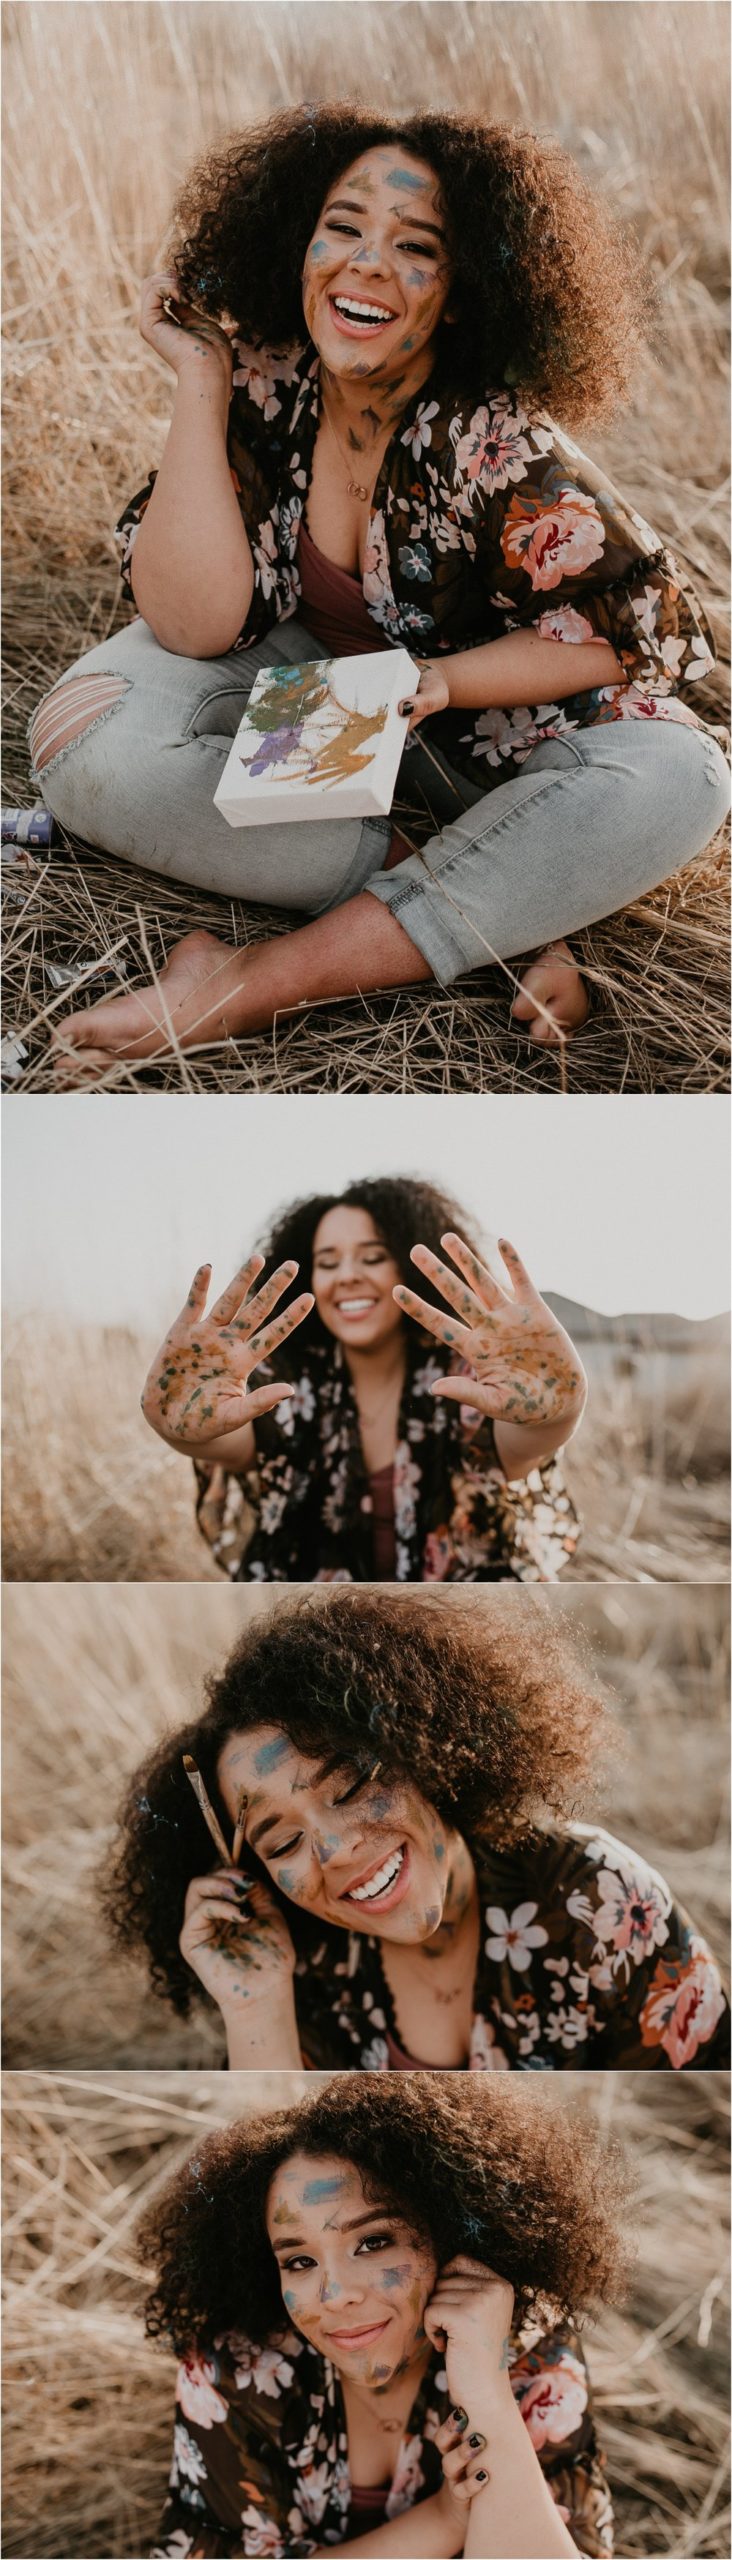 Boise Senior Photographer Makayla Madden Photography Spring Senior Pictures Fun Artistic Artist Paint Senior Photos Meridian Senior Photography Raw Real Trynadee Little Music